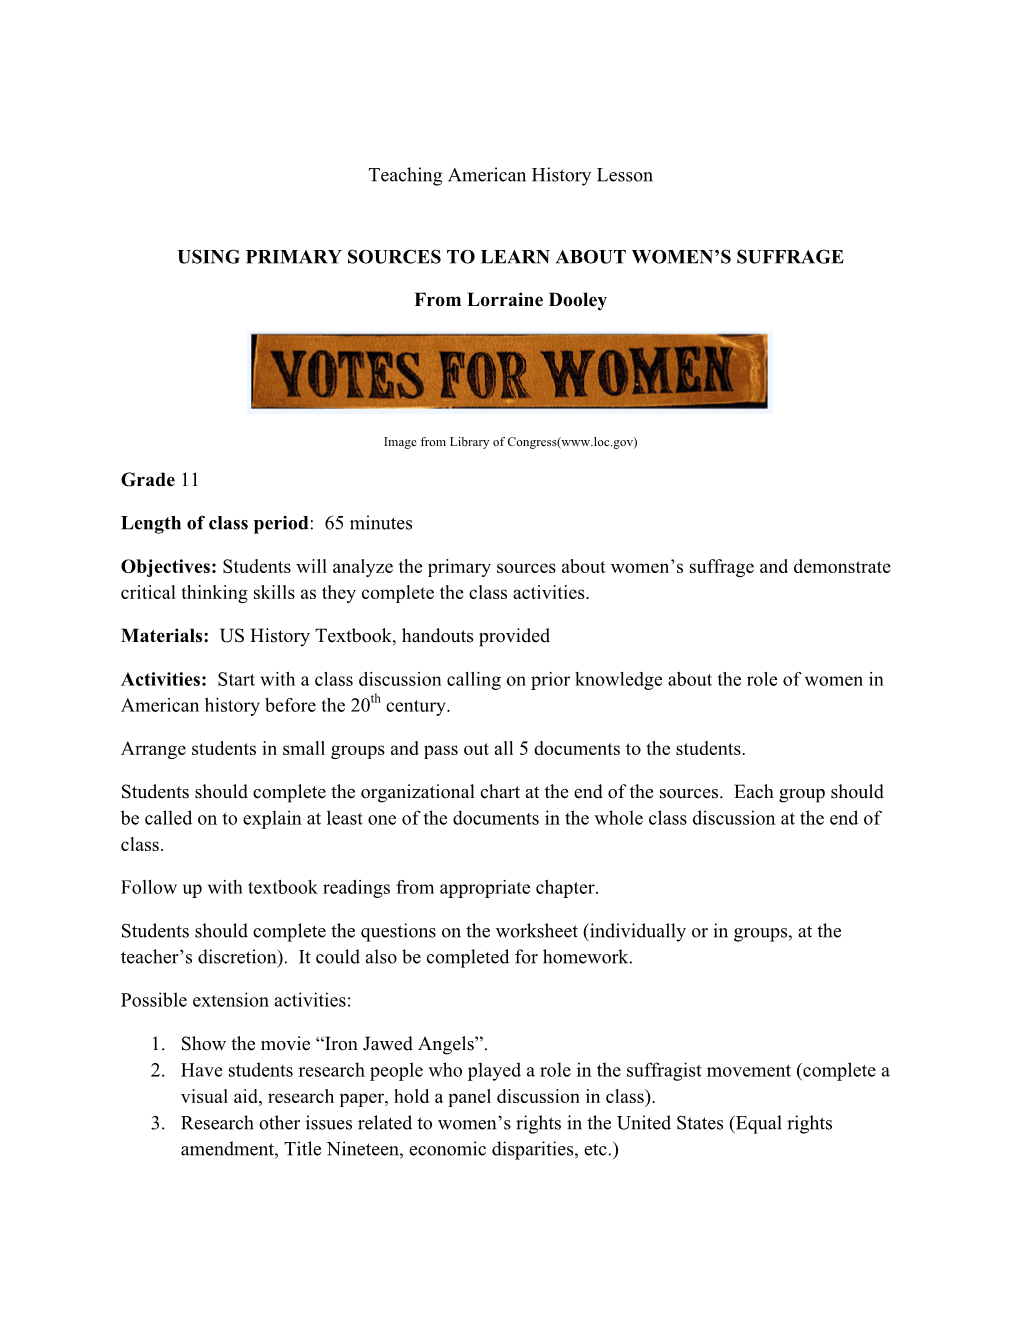 Women's Suffrage Lesson and Materials